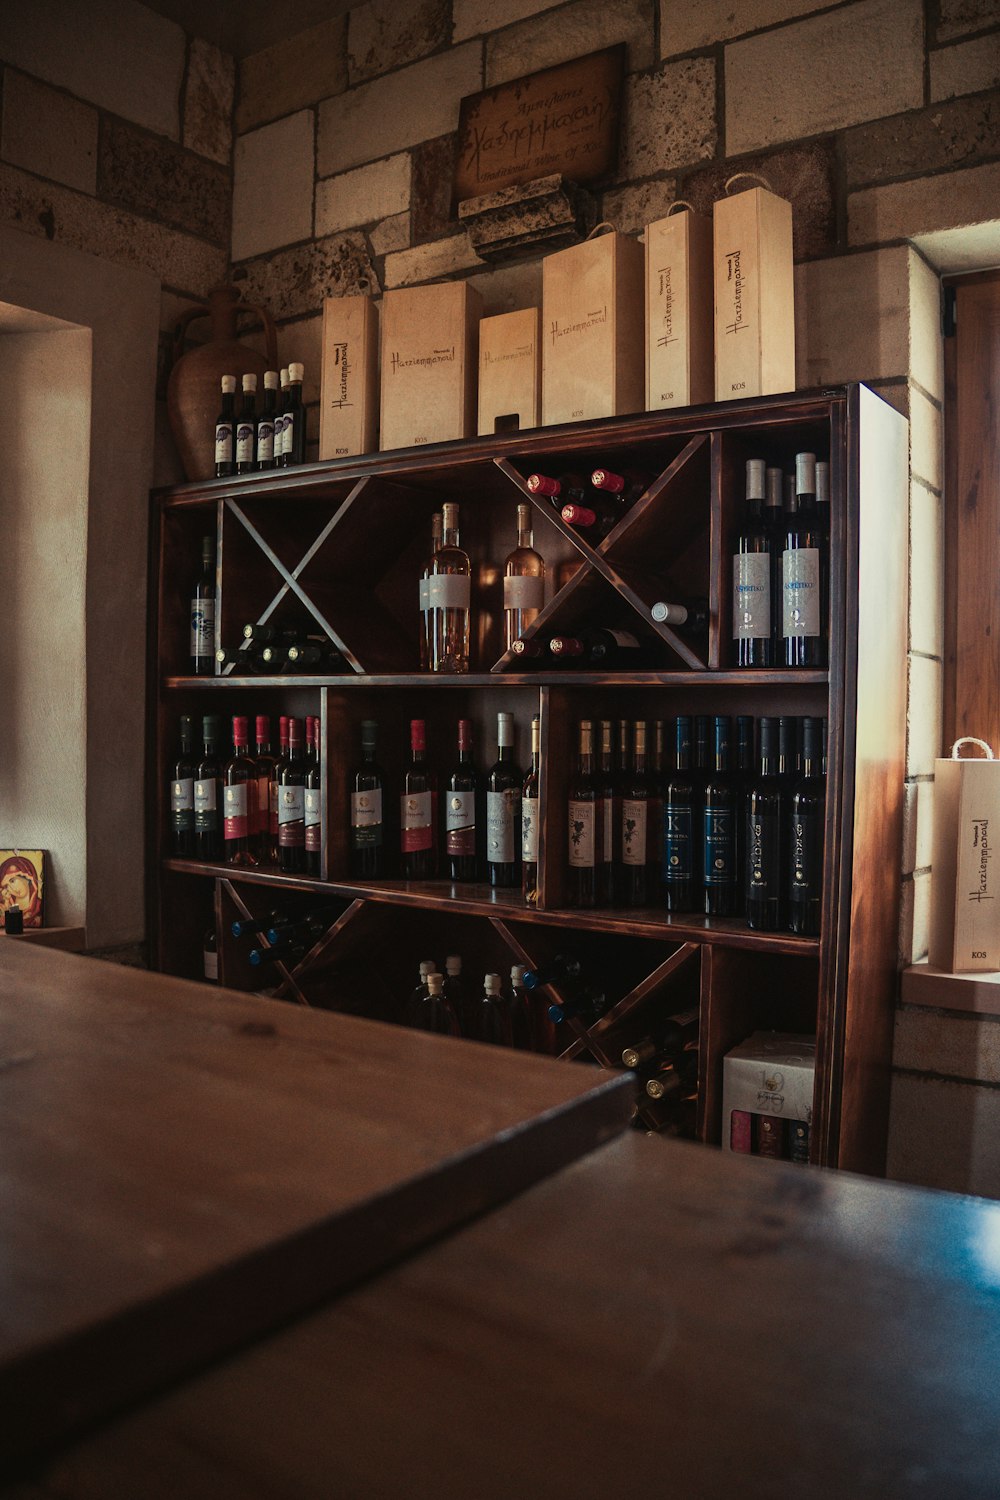 a wooden table sitting in front of a shelf filled with bottles